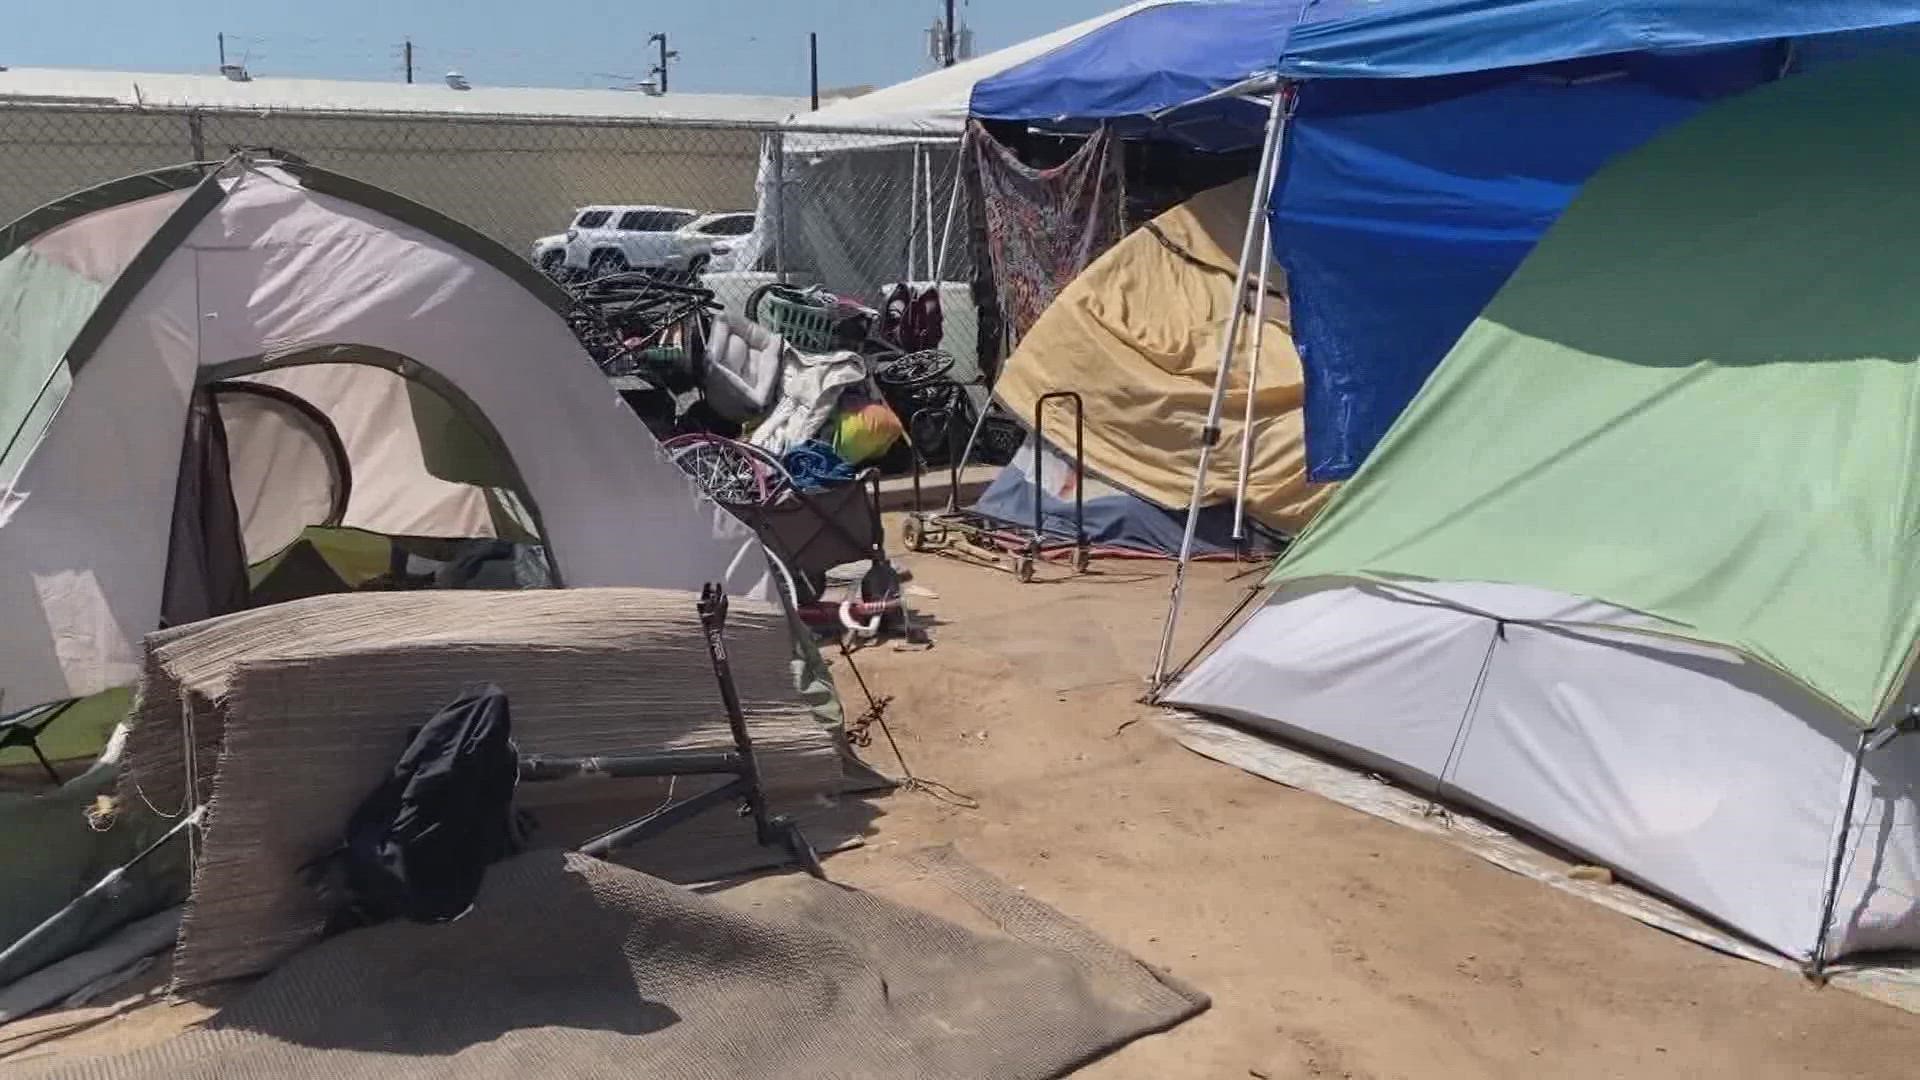 Court records show the City of Phoenix is pushing back against the residents who filed a lawsuit last month, claiming the city was failing to address homelessness.